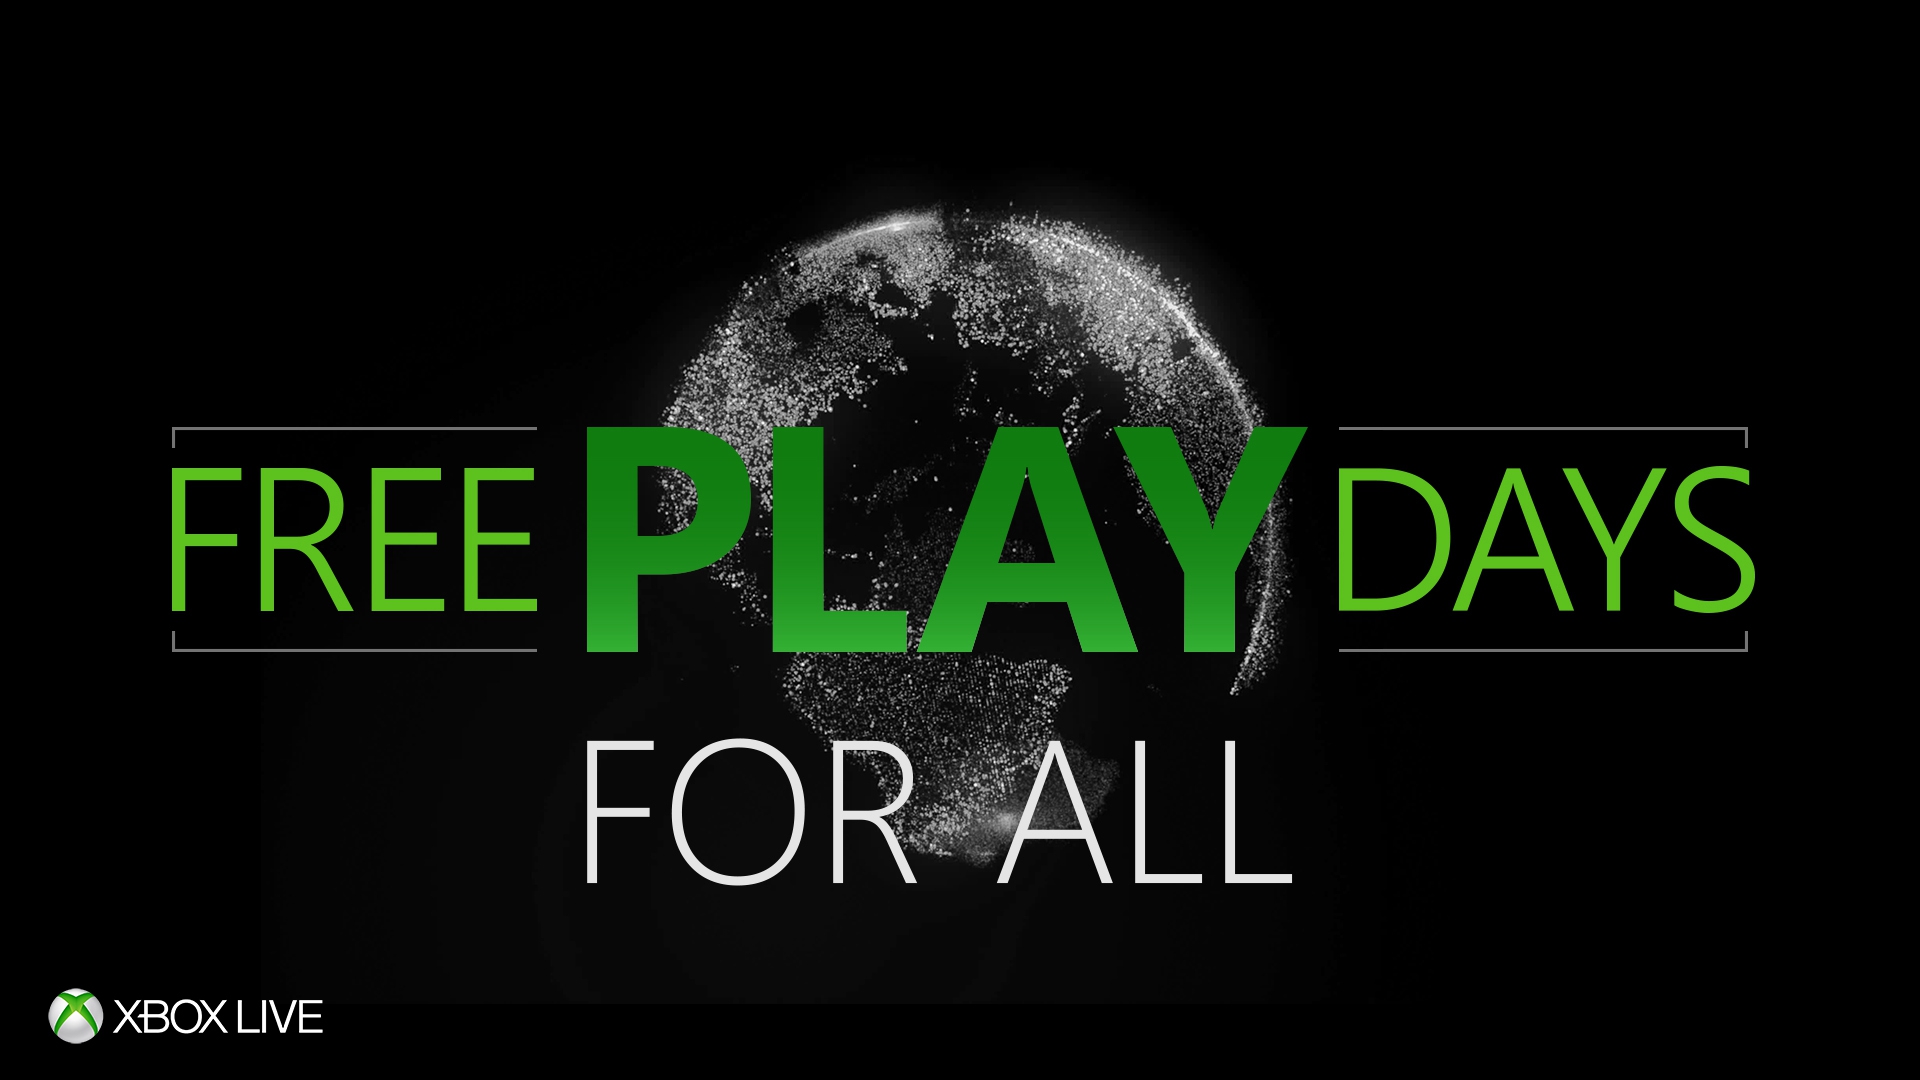 What are Xbox free play days?